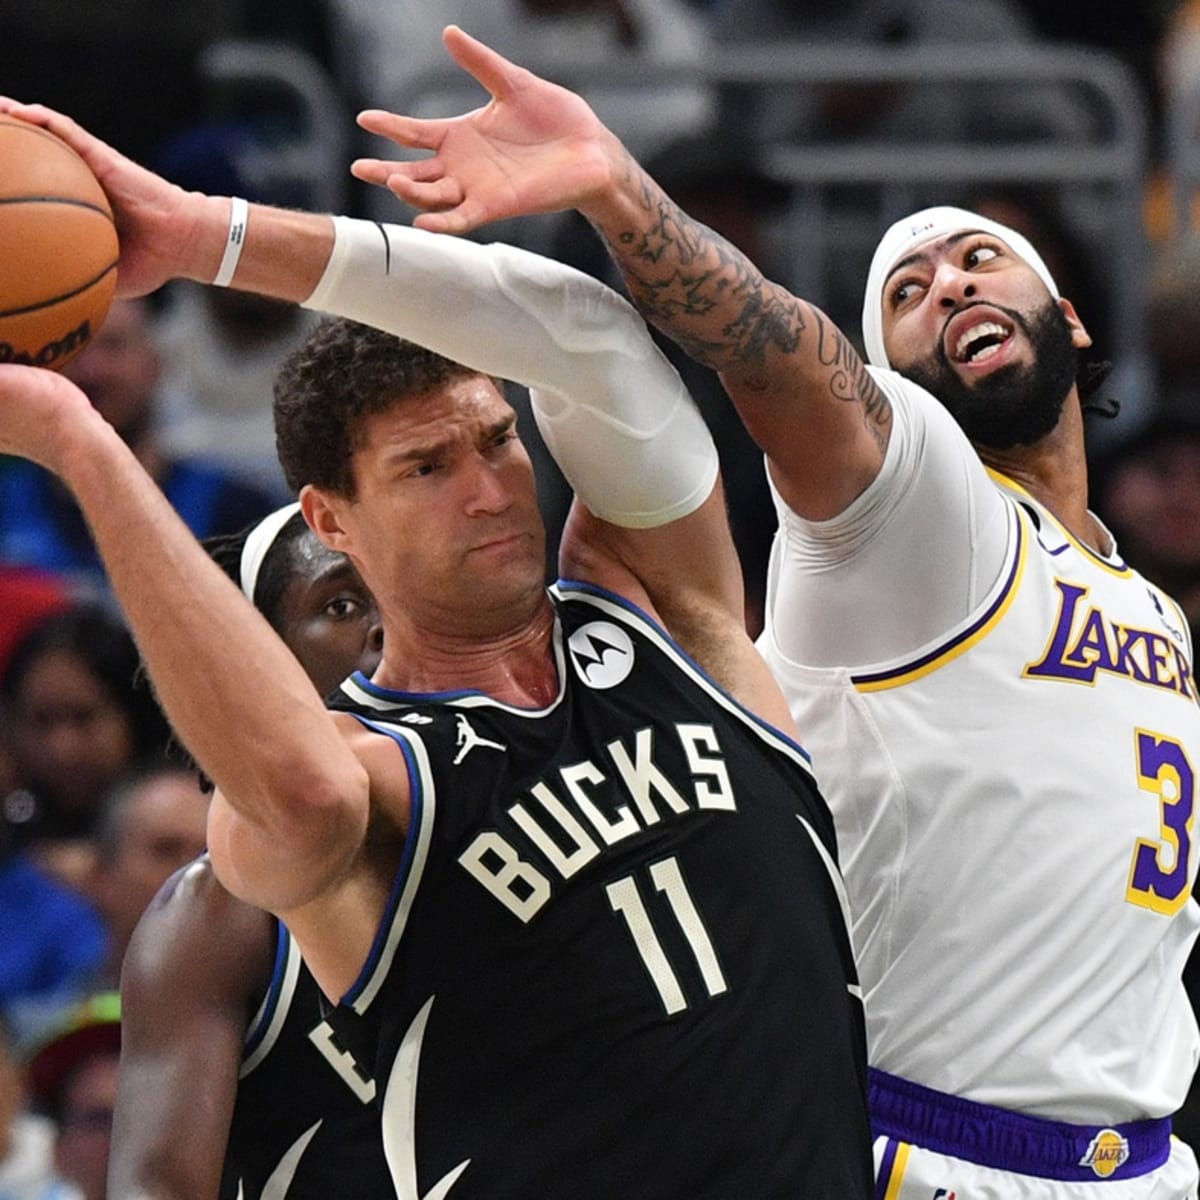 REPORT: Brook Lopez Eyes Return From Lower Back Injury